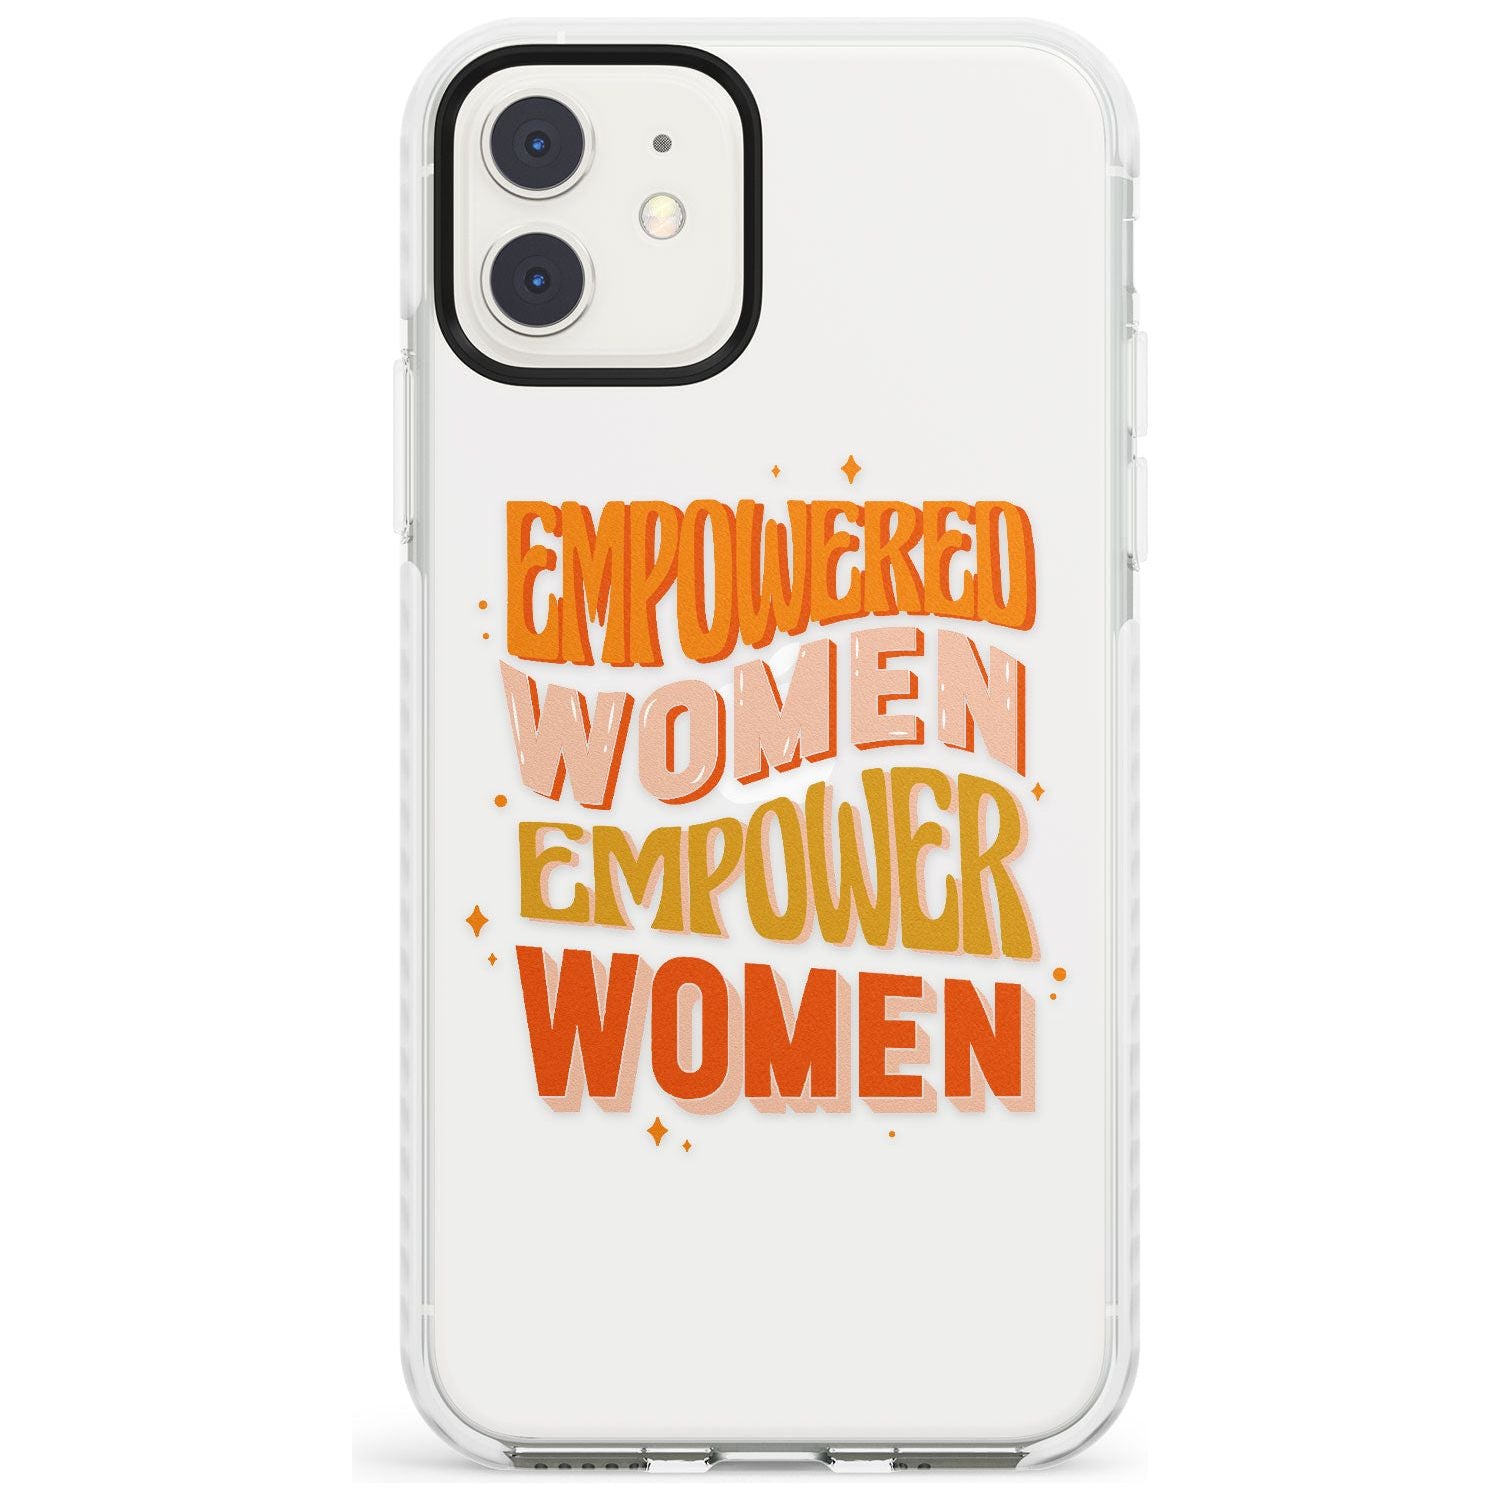 Empowered Women Impact Phone Case for iPhone 11